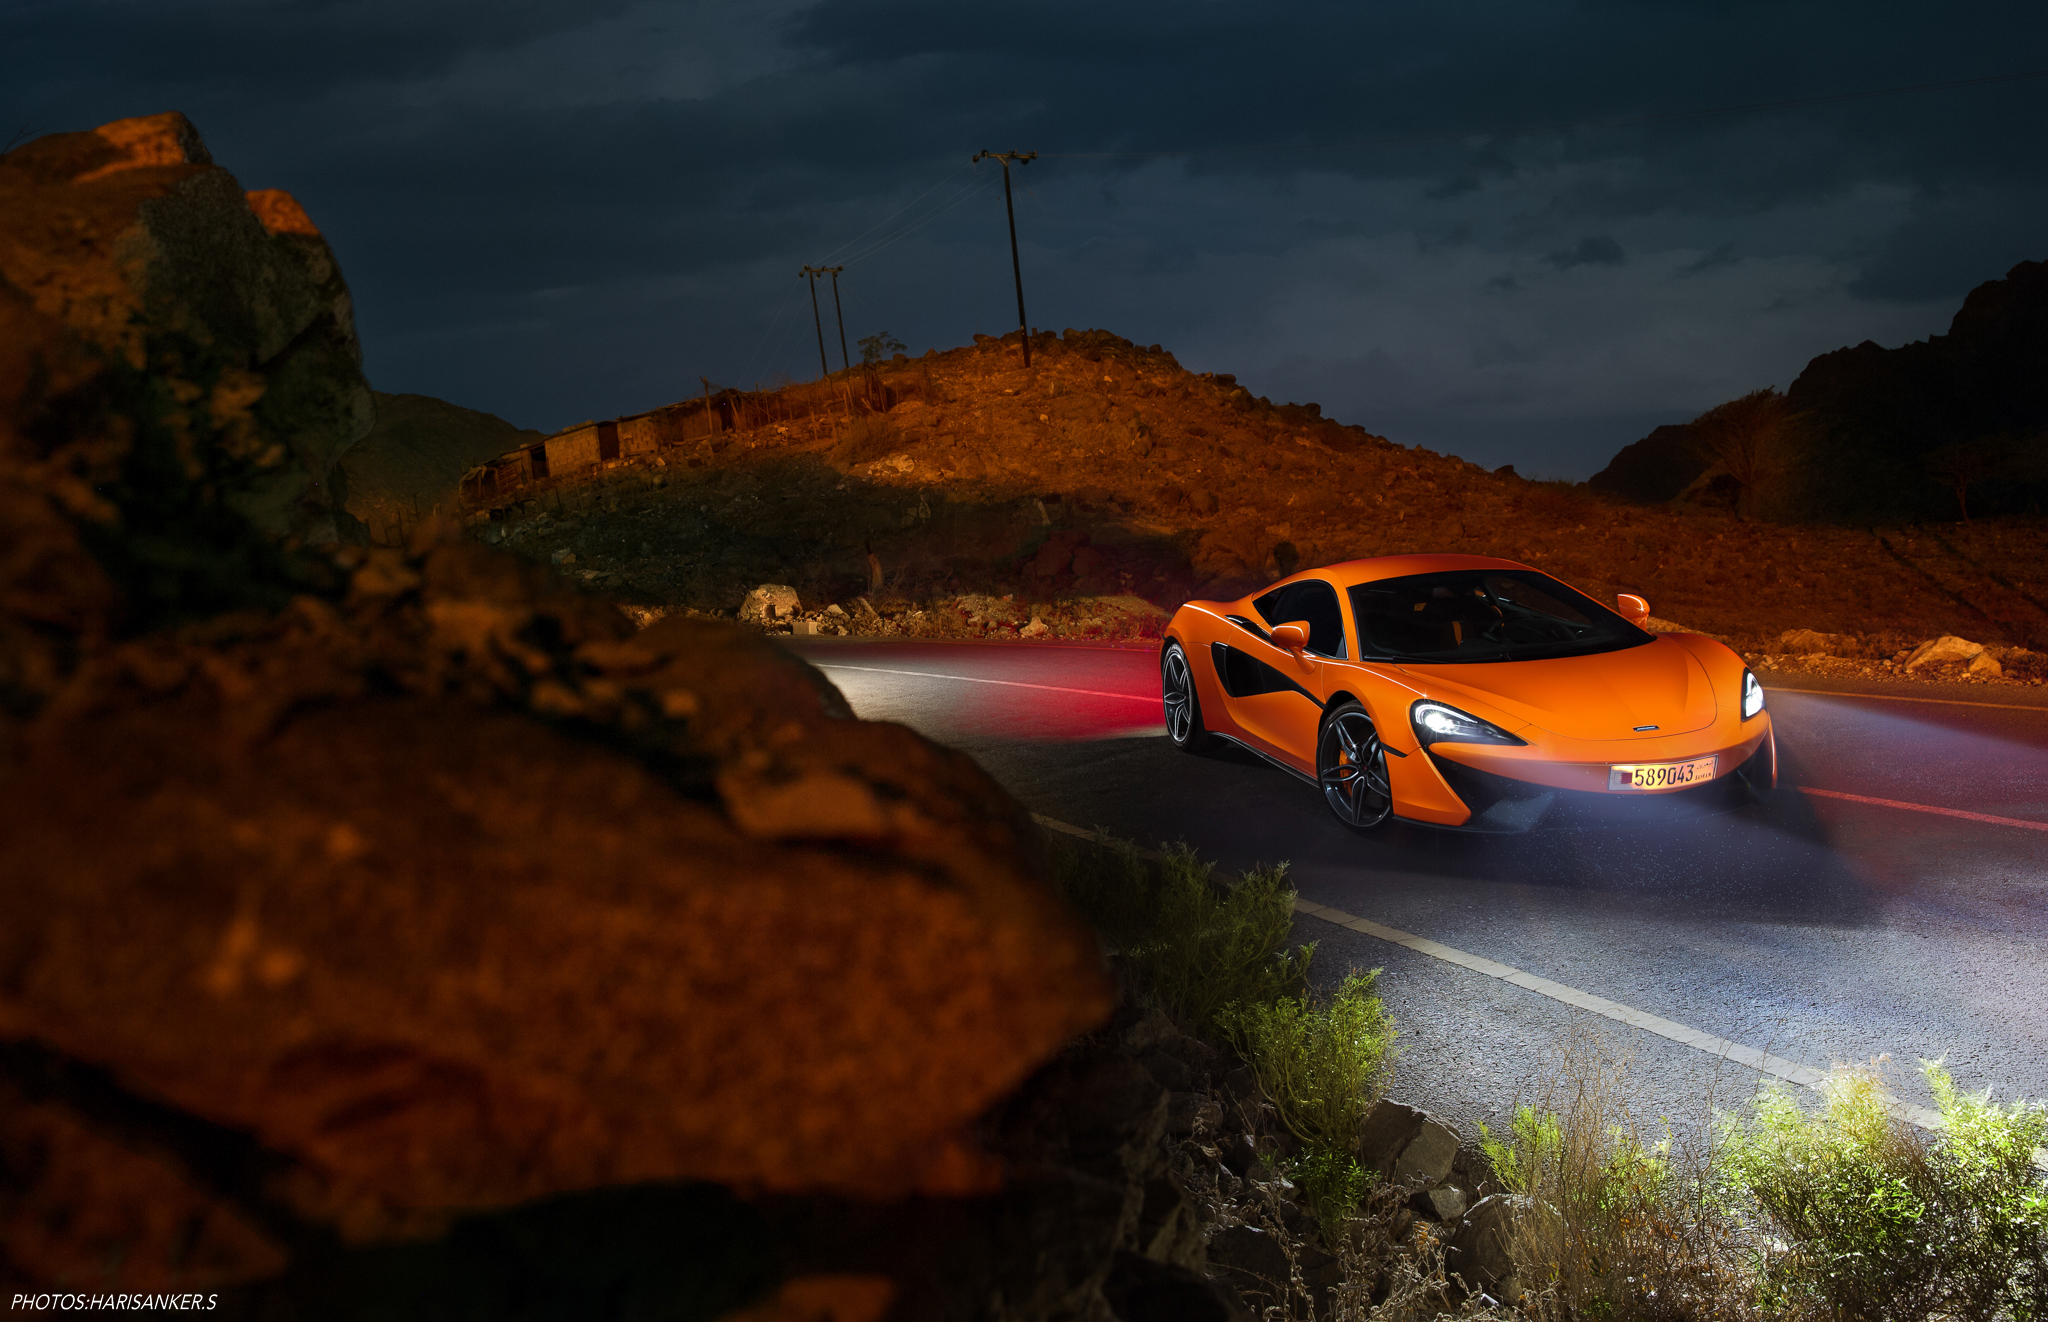 Free photo An orange-colored Mclaren on the road at night.